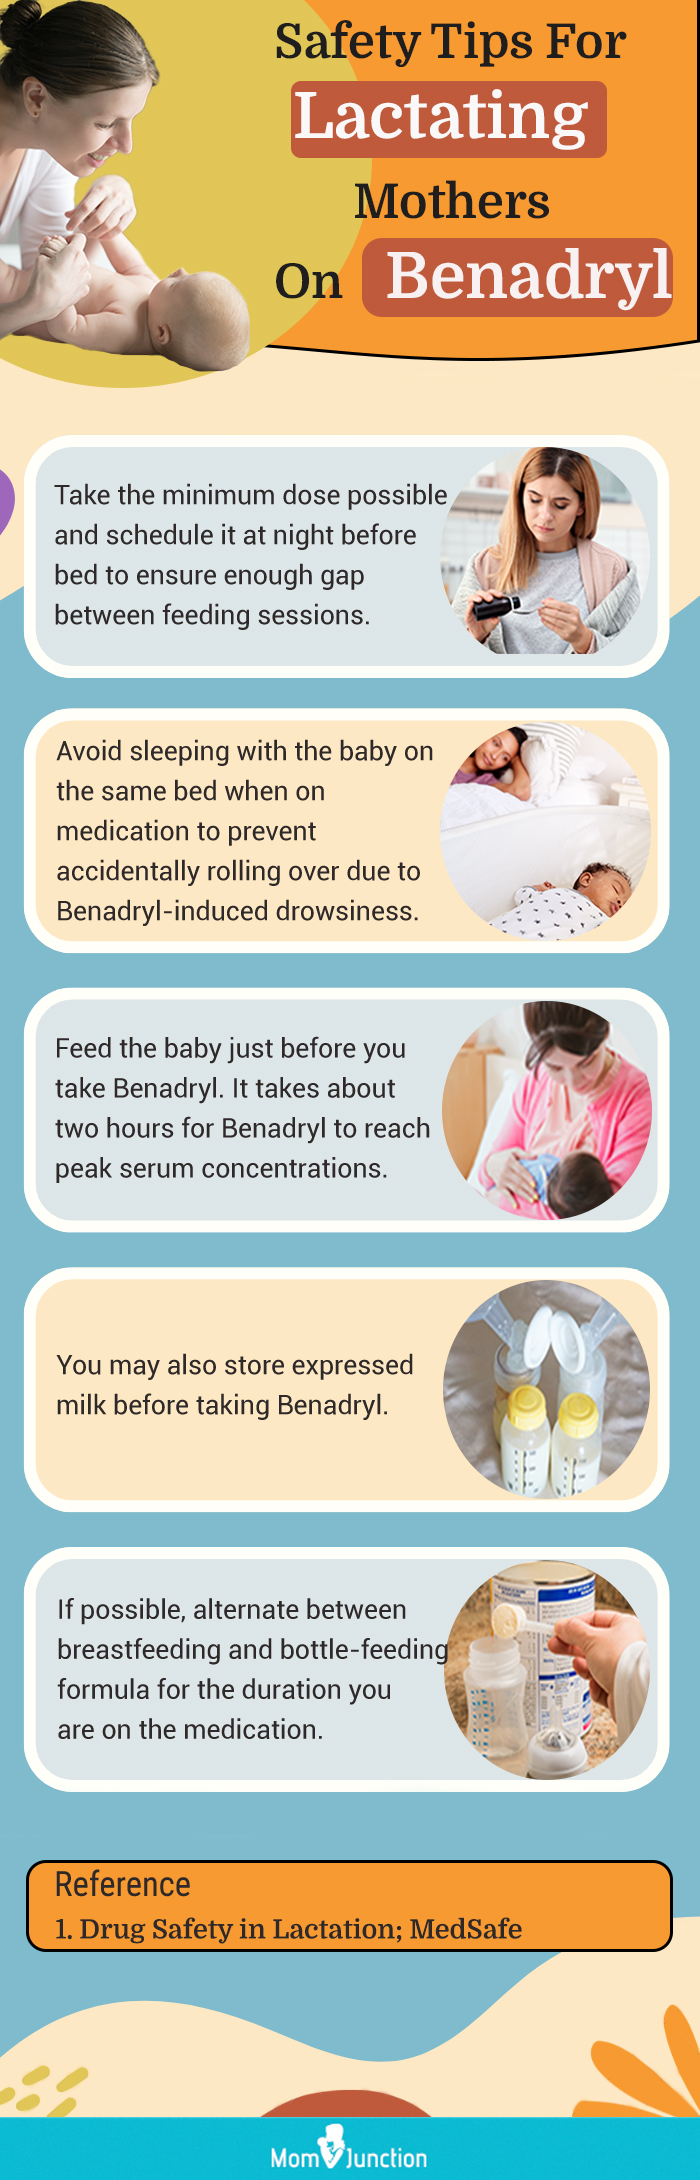 safety tips for lactating mothers on benadryl [infographic]